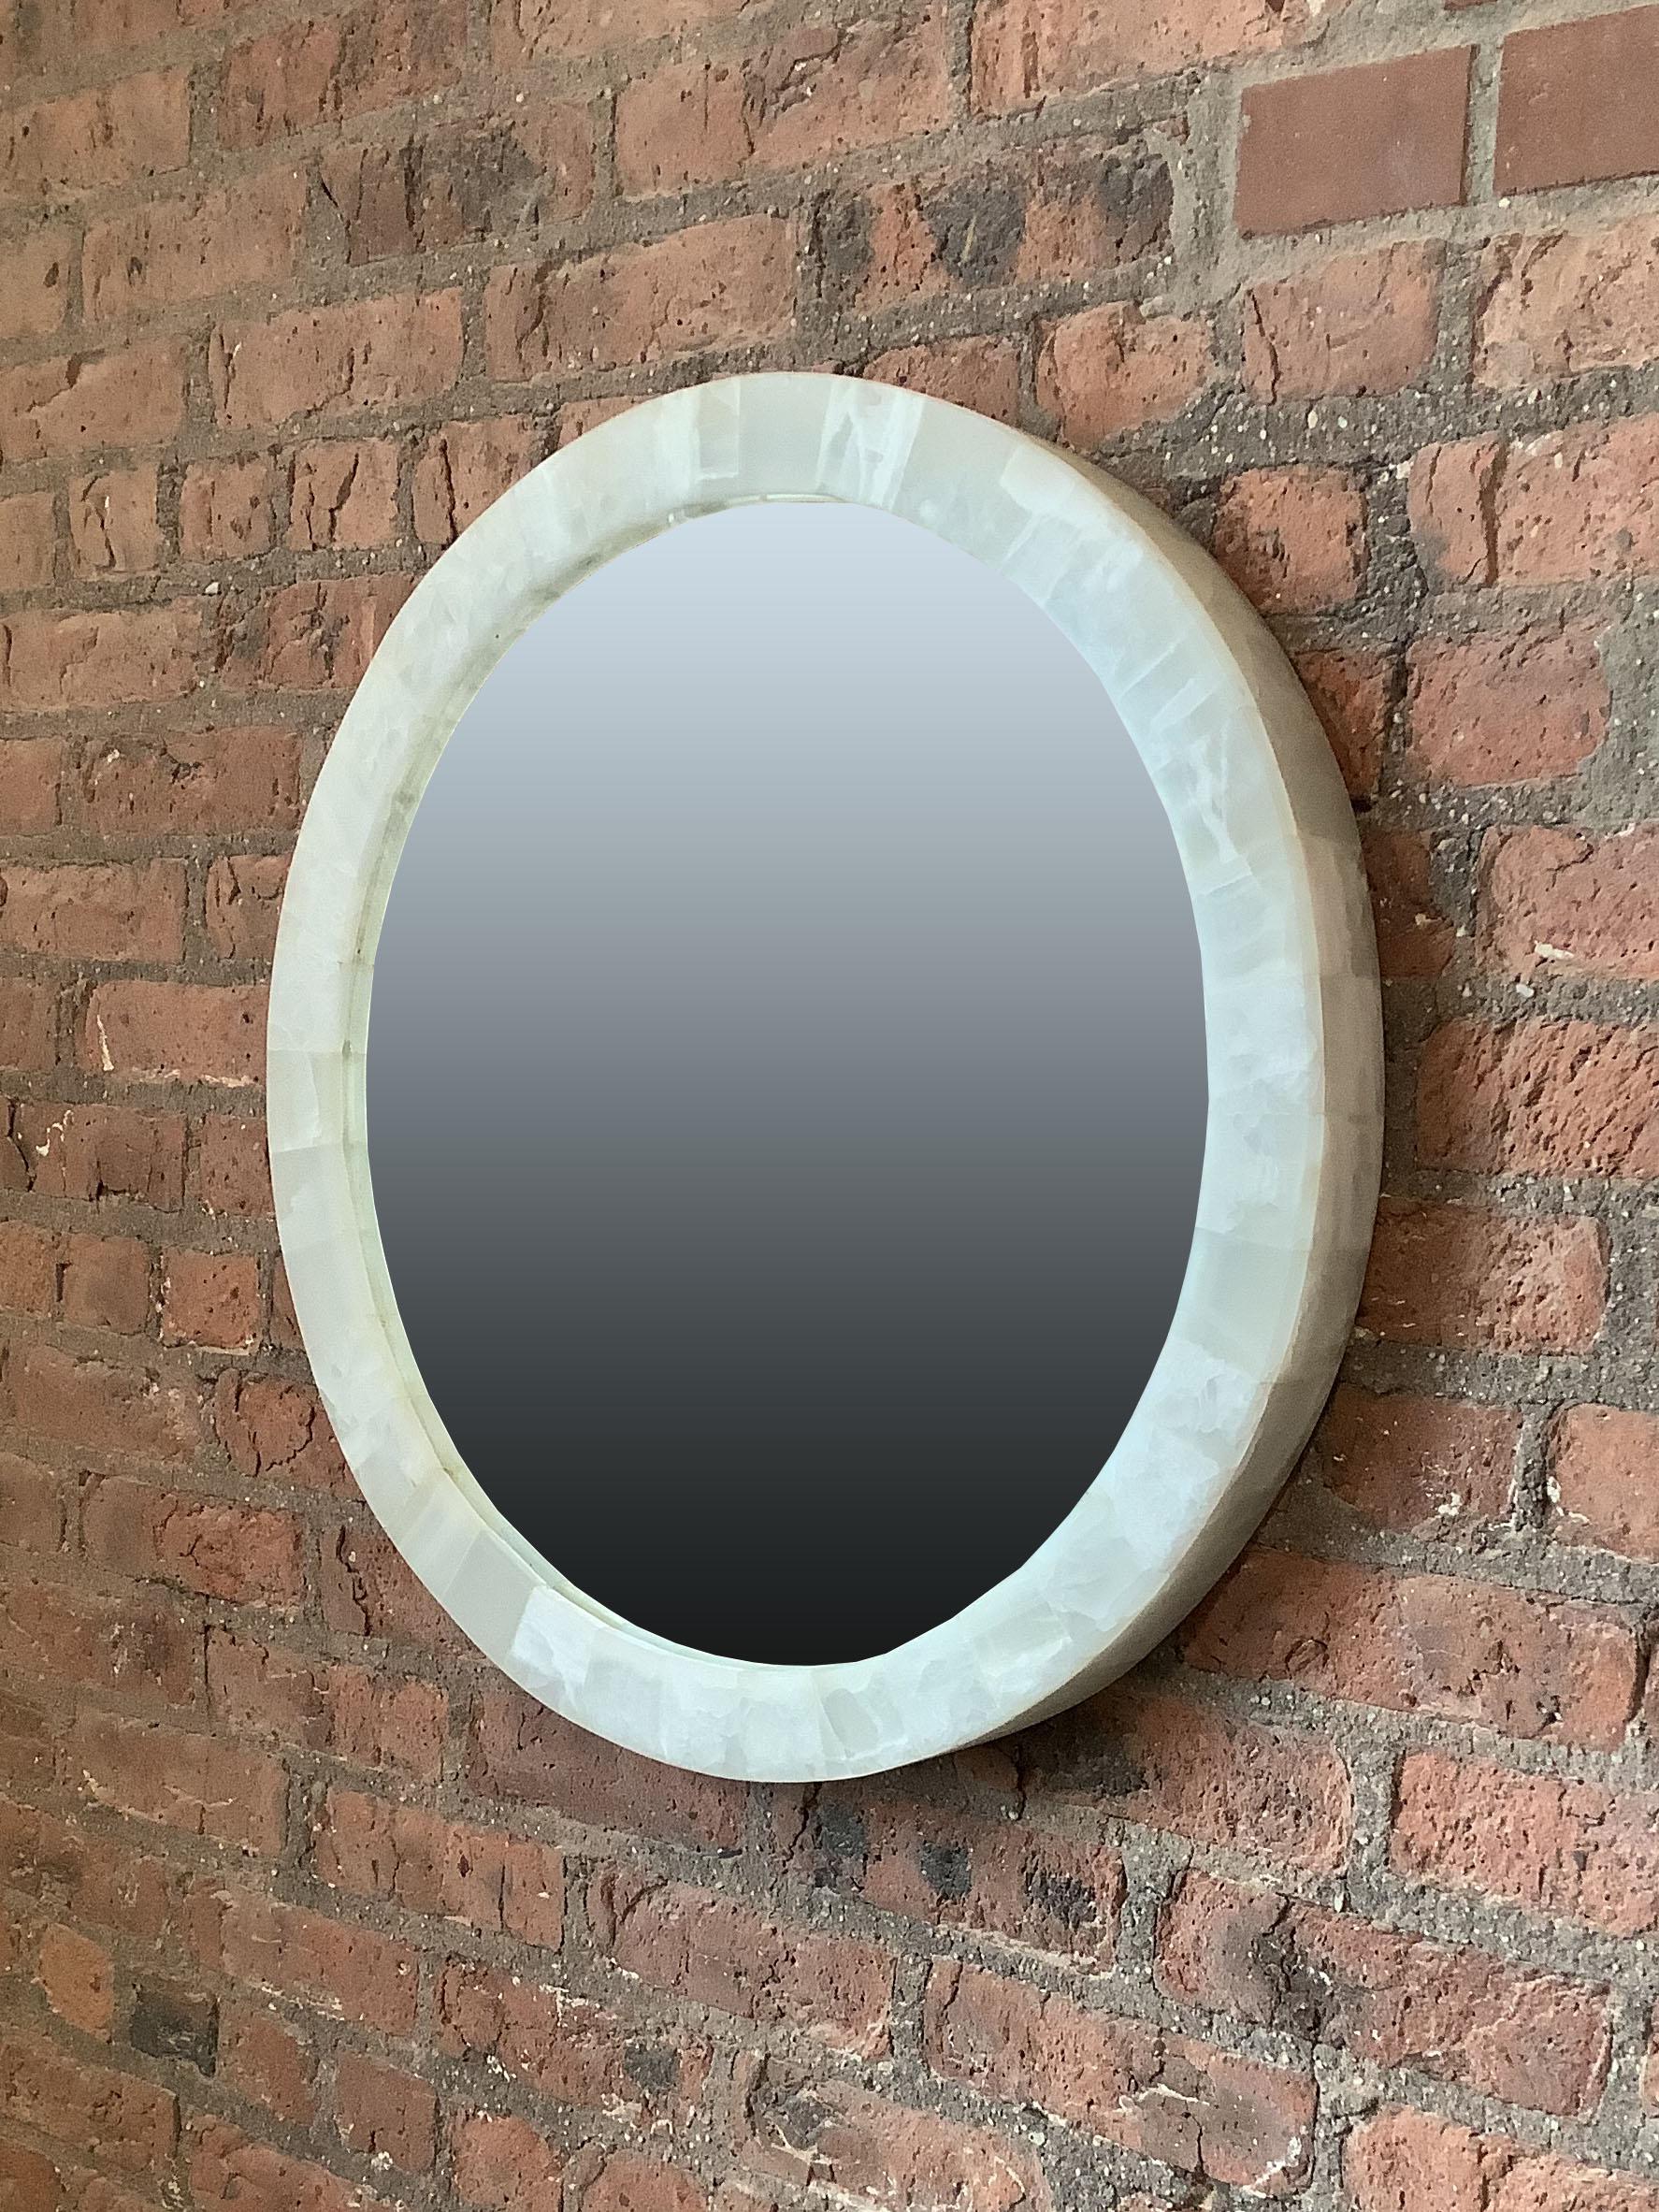 Round wall mirror in onyx. (2 available)
Onyx Mirrors

Although there are a few other places in the world where the semi-precious stone Onyx exist, we found our collection in Mexico.

A bit of information on the Semi-Precious Stone Onyx.
While